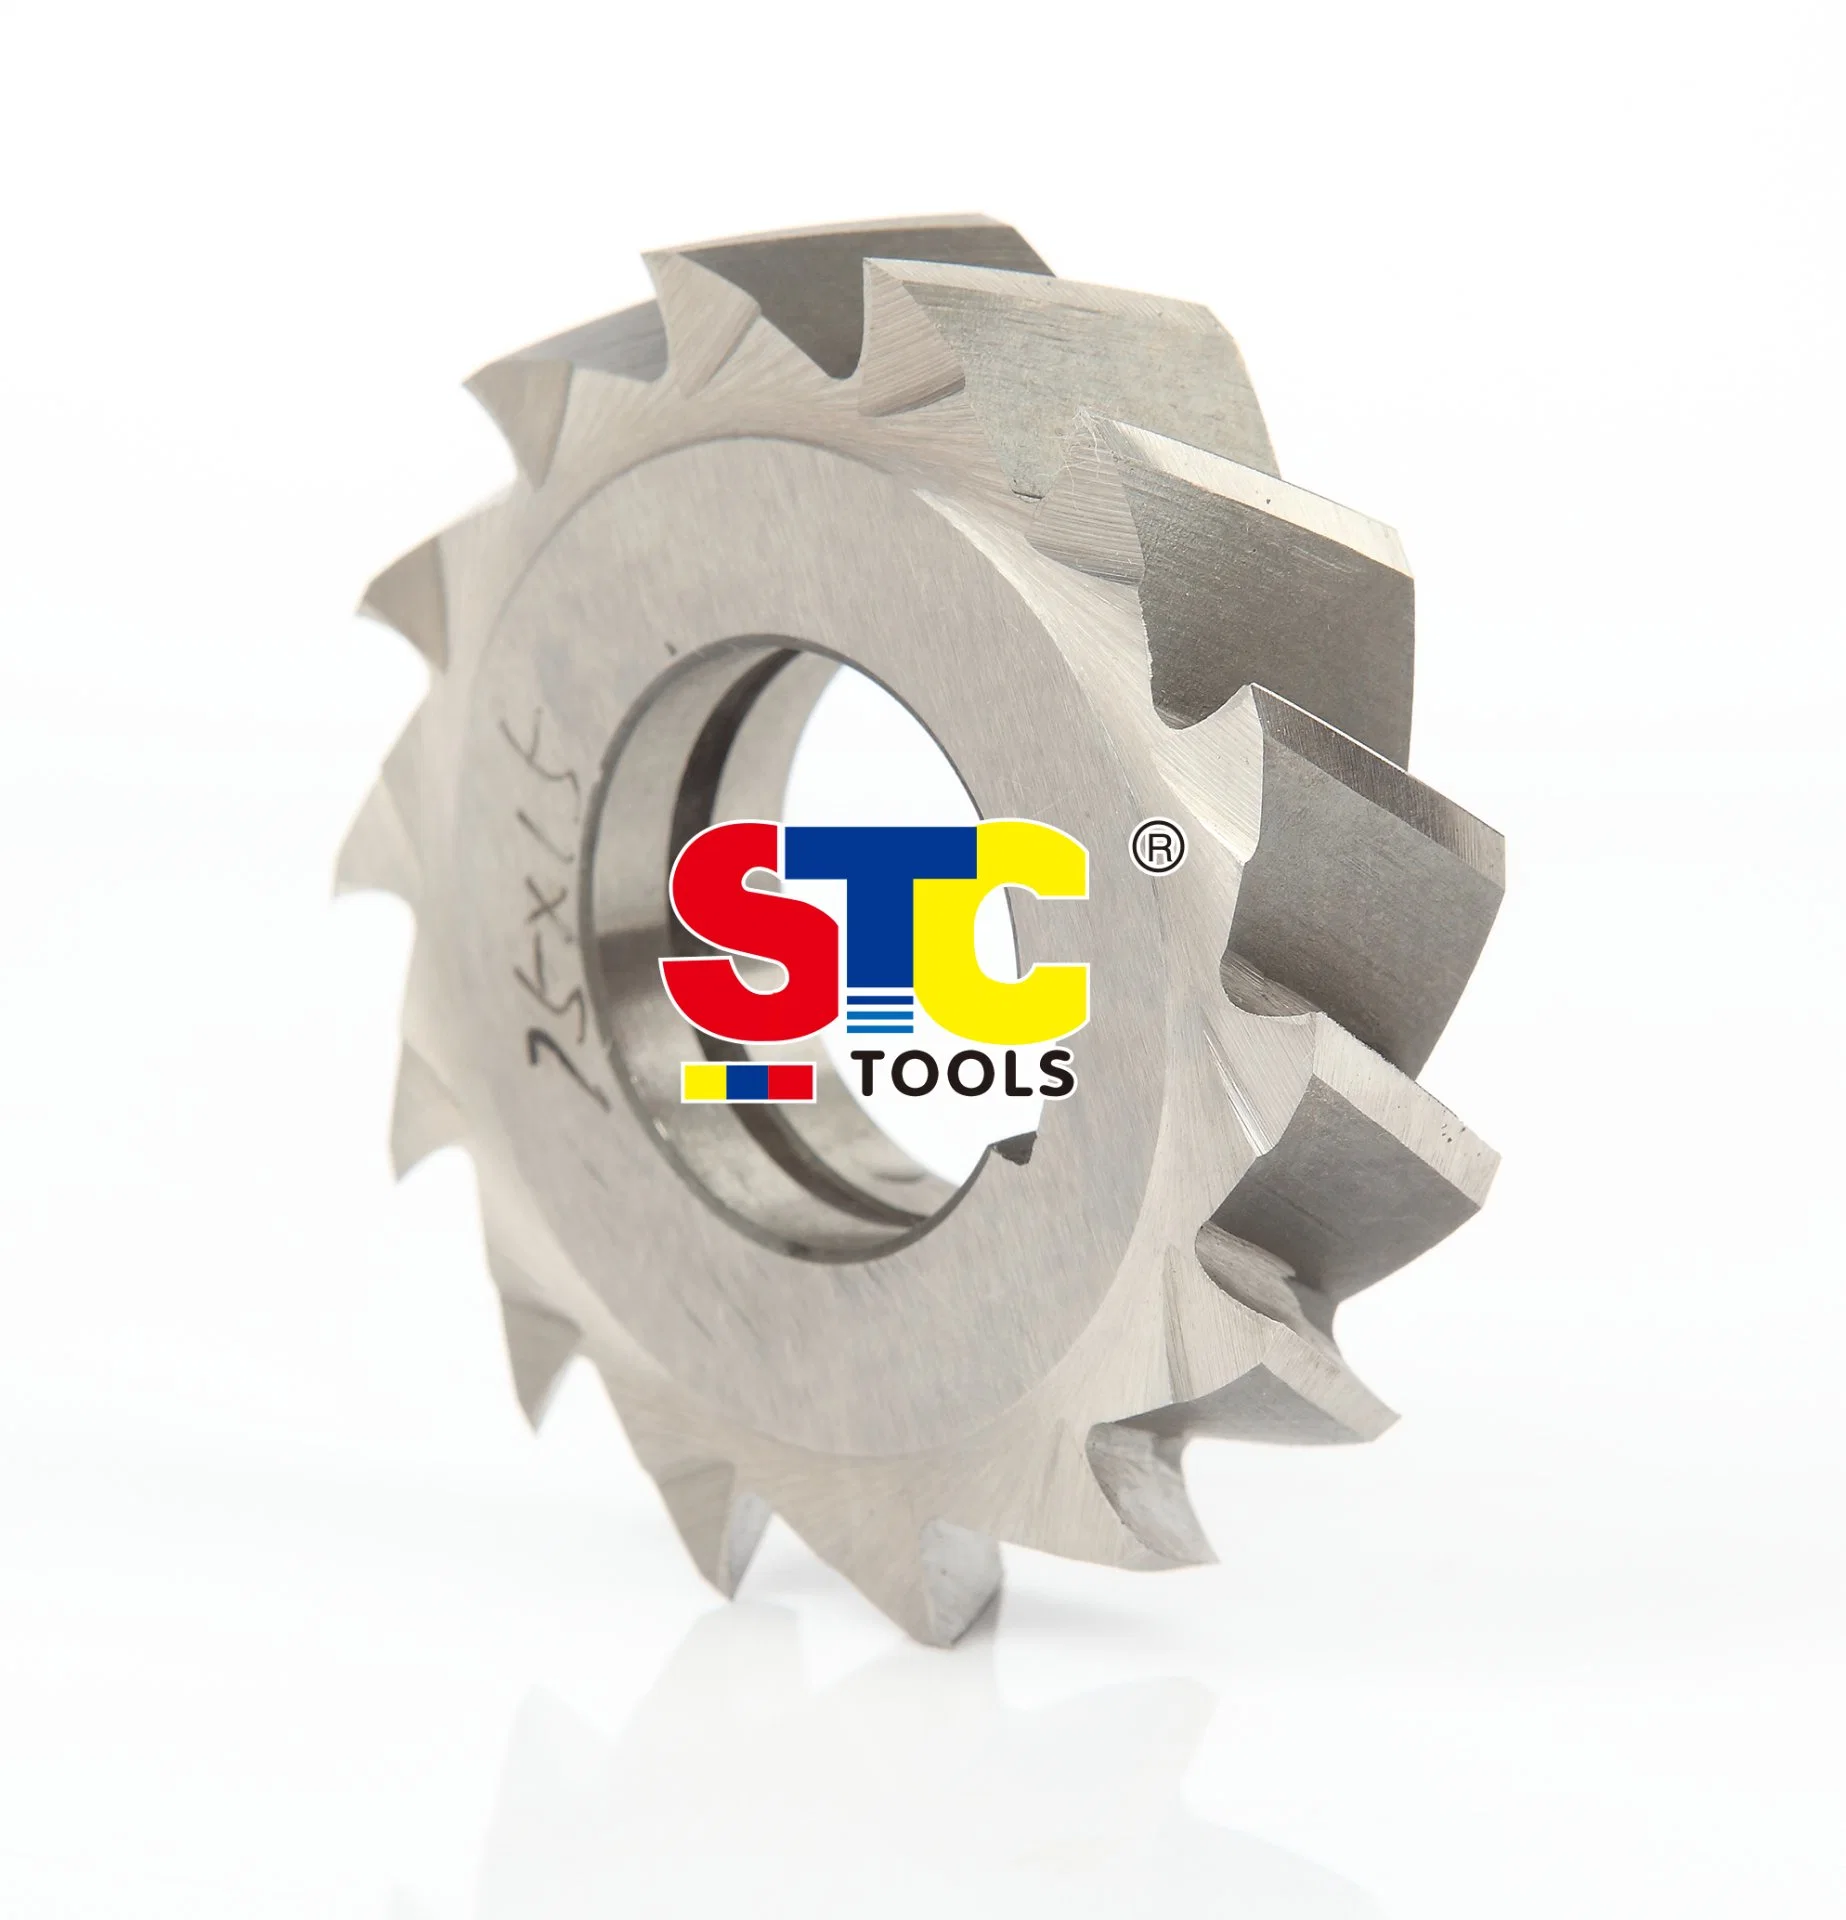 HSS and Hsse Shell Milling Cutters